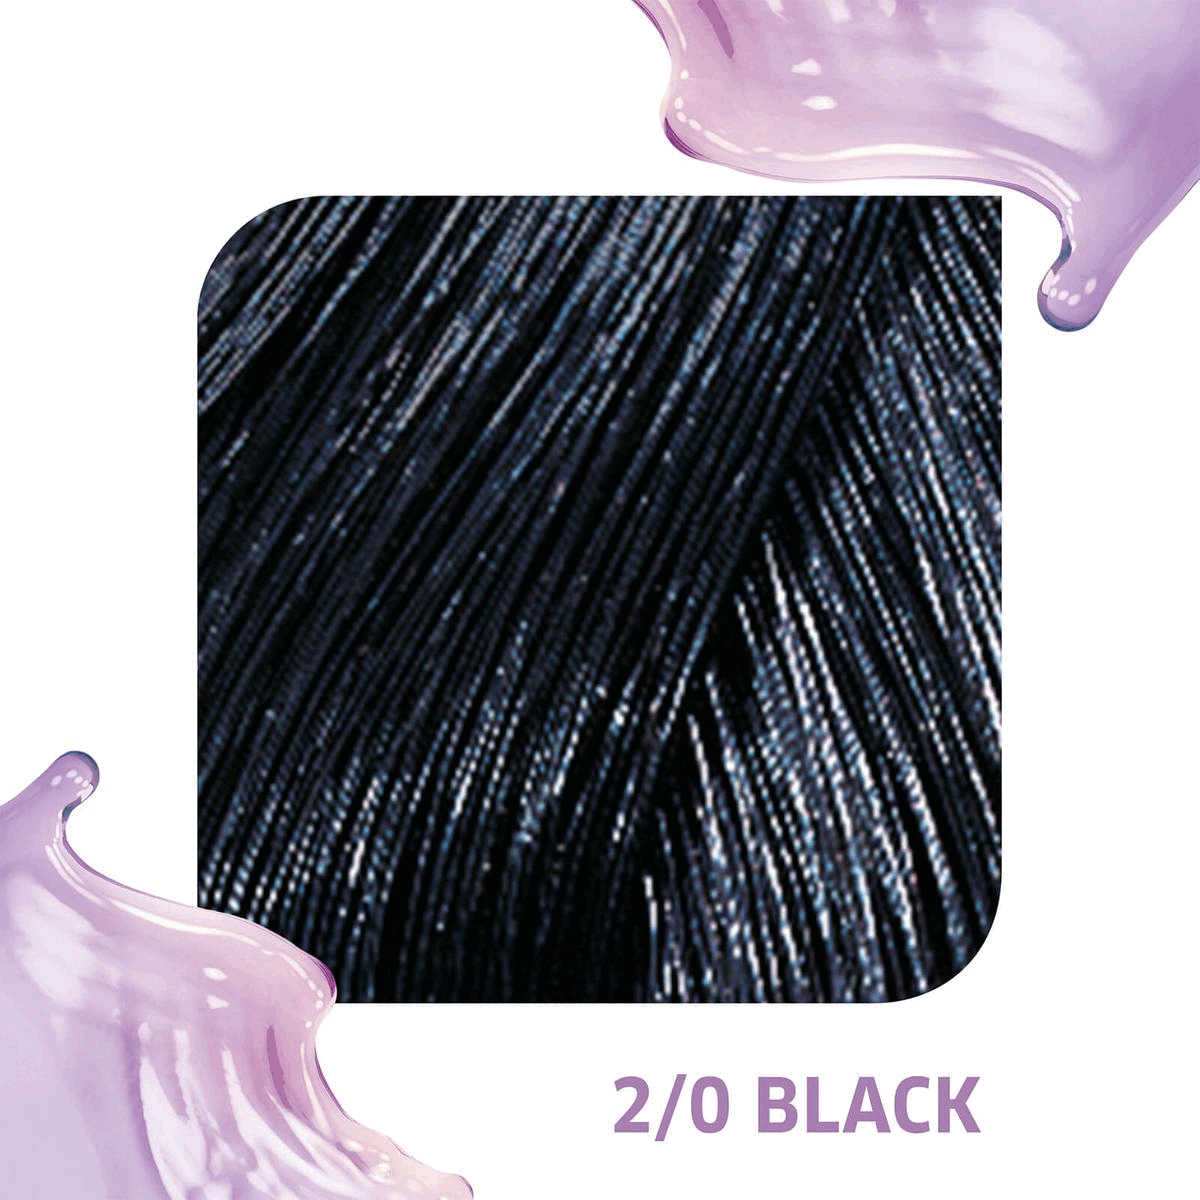 2/0 Black 75ml Semi-Permenant Colour enhance. 2/0 Black 75mlSemi-Permenant Colour enhance. 2/0 Black 75mlSemi-Permenant Colour enhance.Direct Dies and Vitamin Care Complex. Lasts Up to 10 Shampoos. Colour, depth and tone. Quick and Easy Application. 